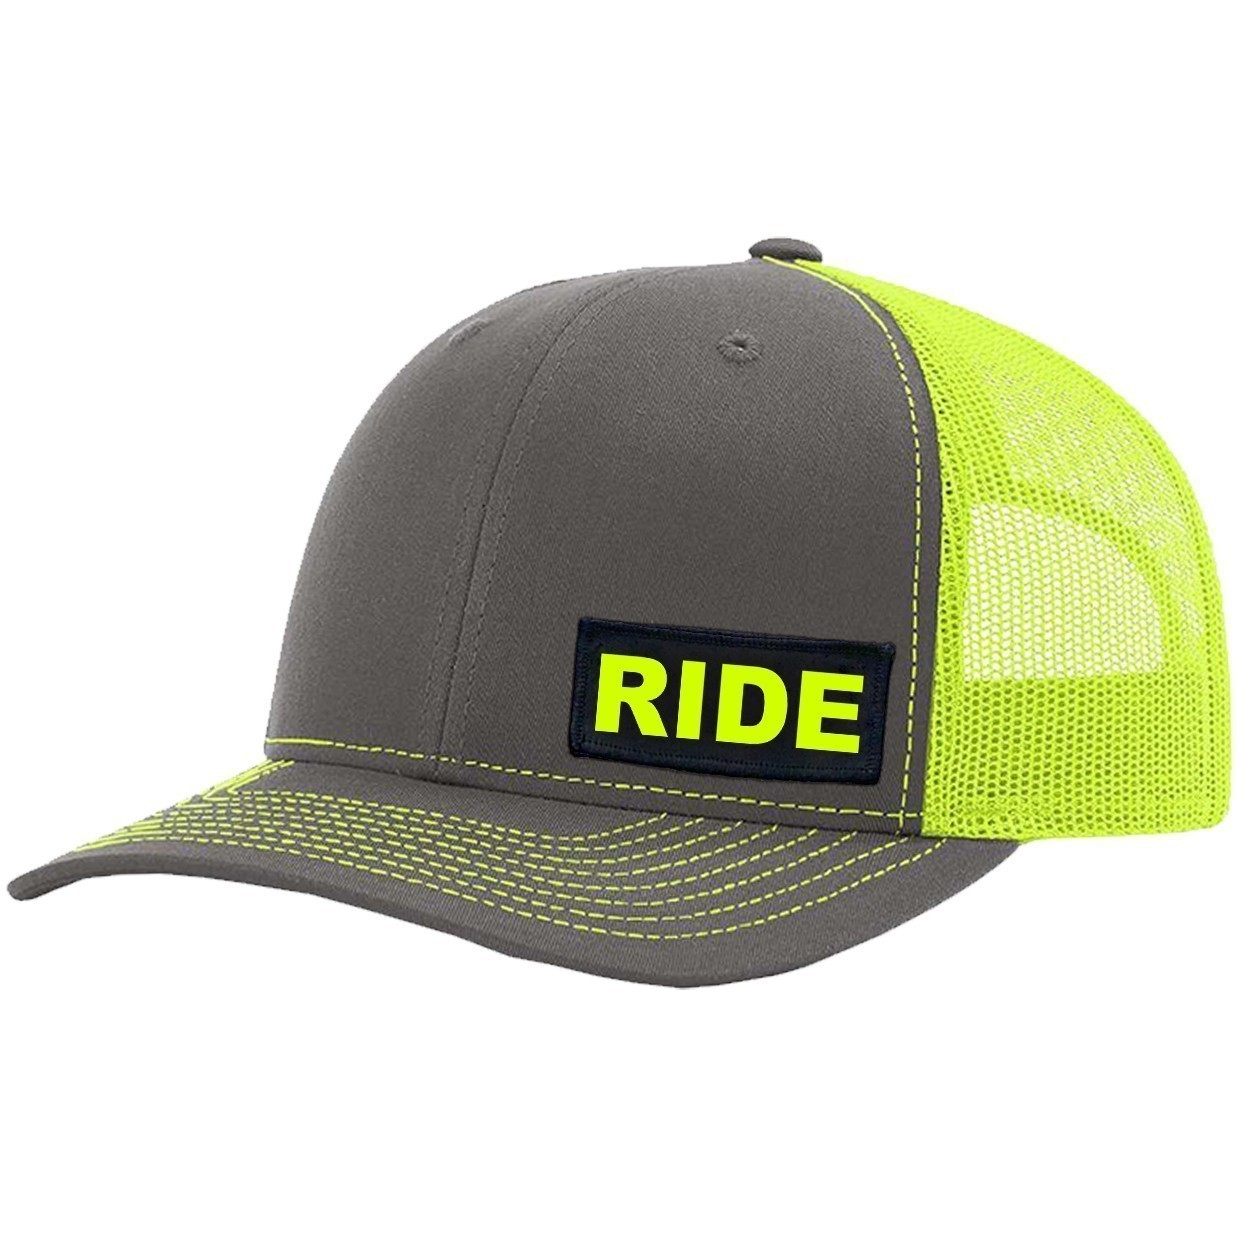 Ride Brand Logo Night Out Woven Patch Snapback Trucker Hat Charcoal/Neon Yellow (Hi-Vis Logo)